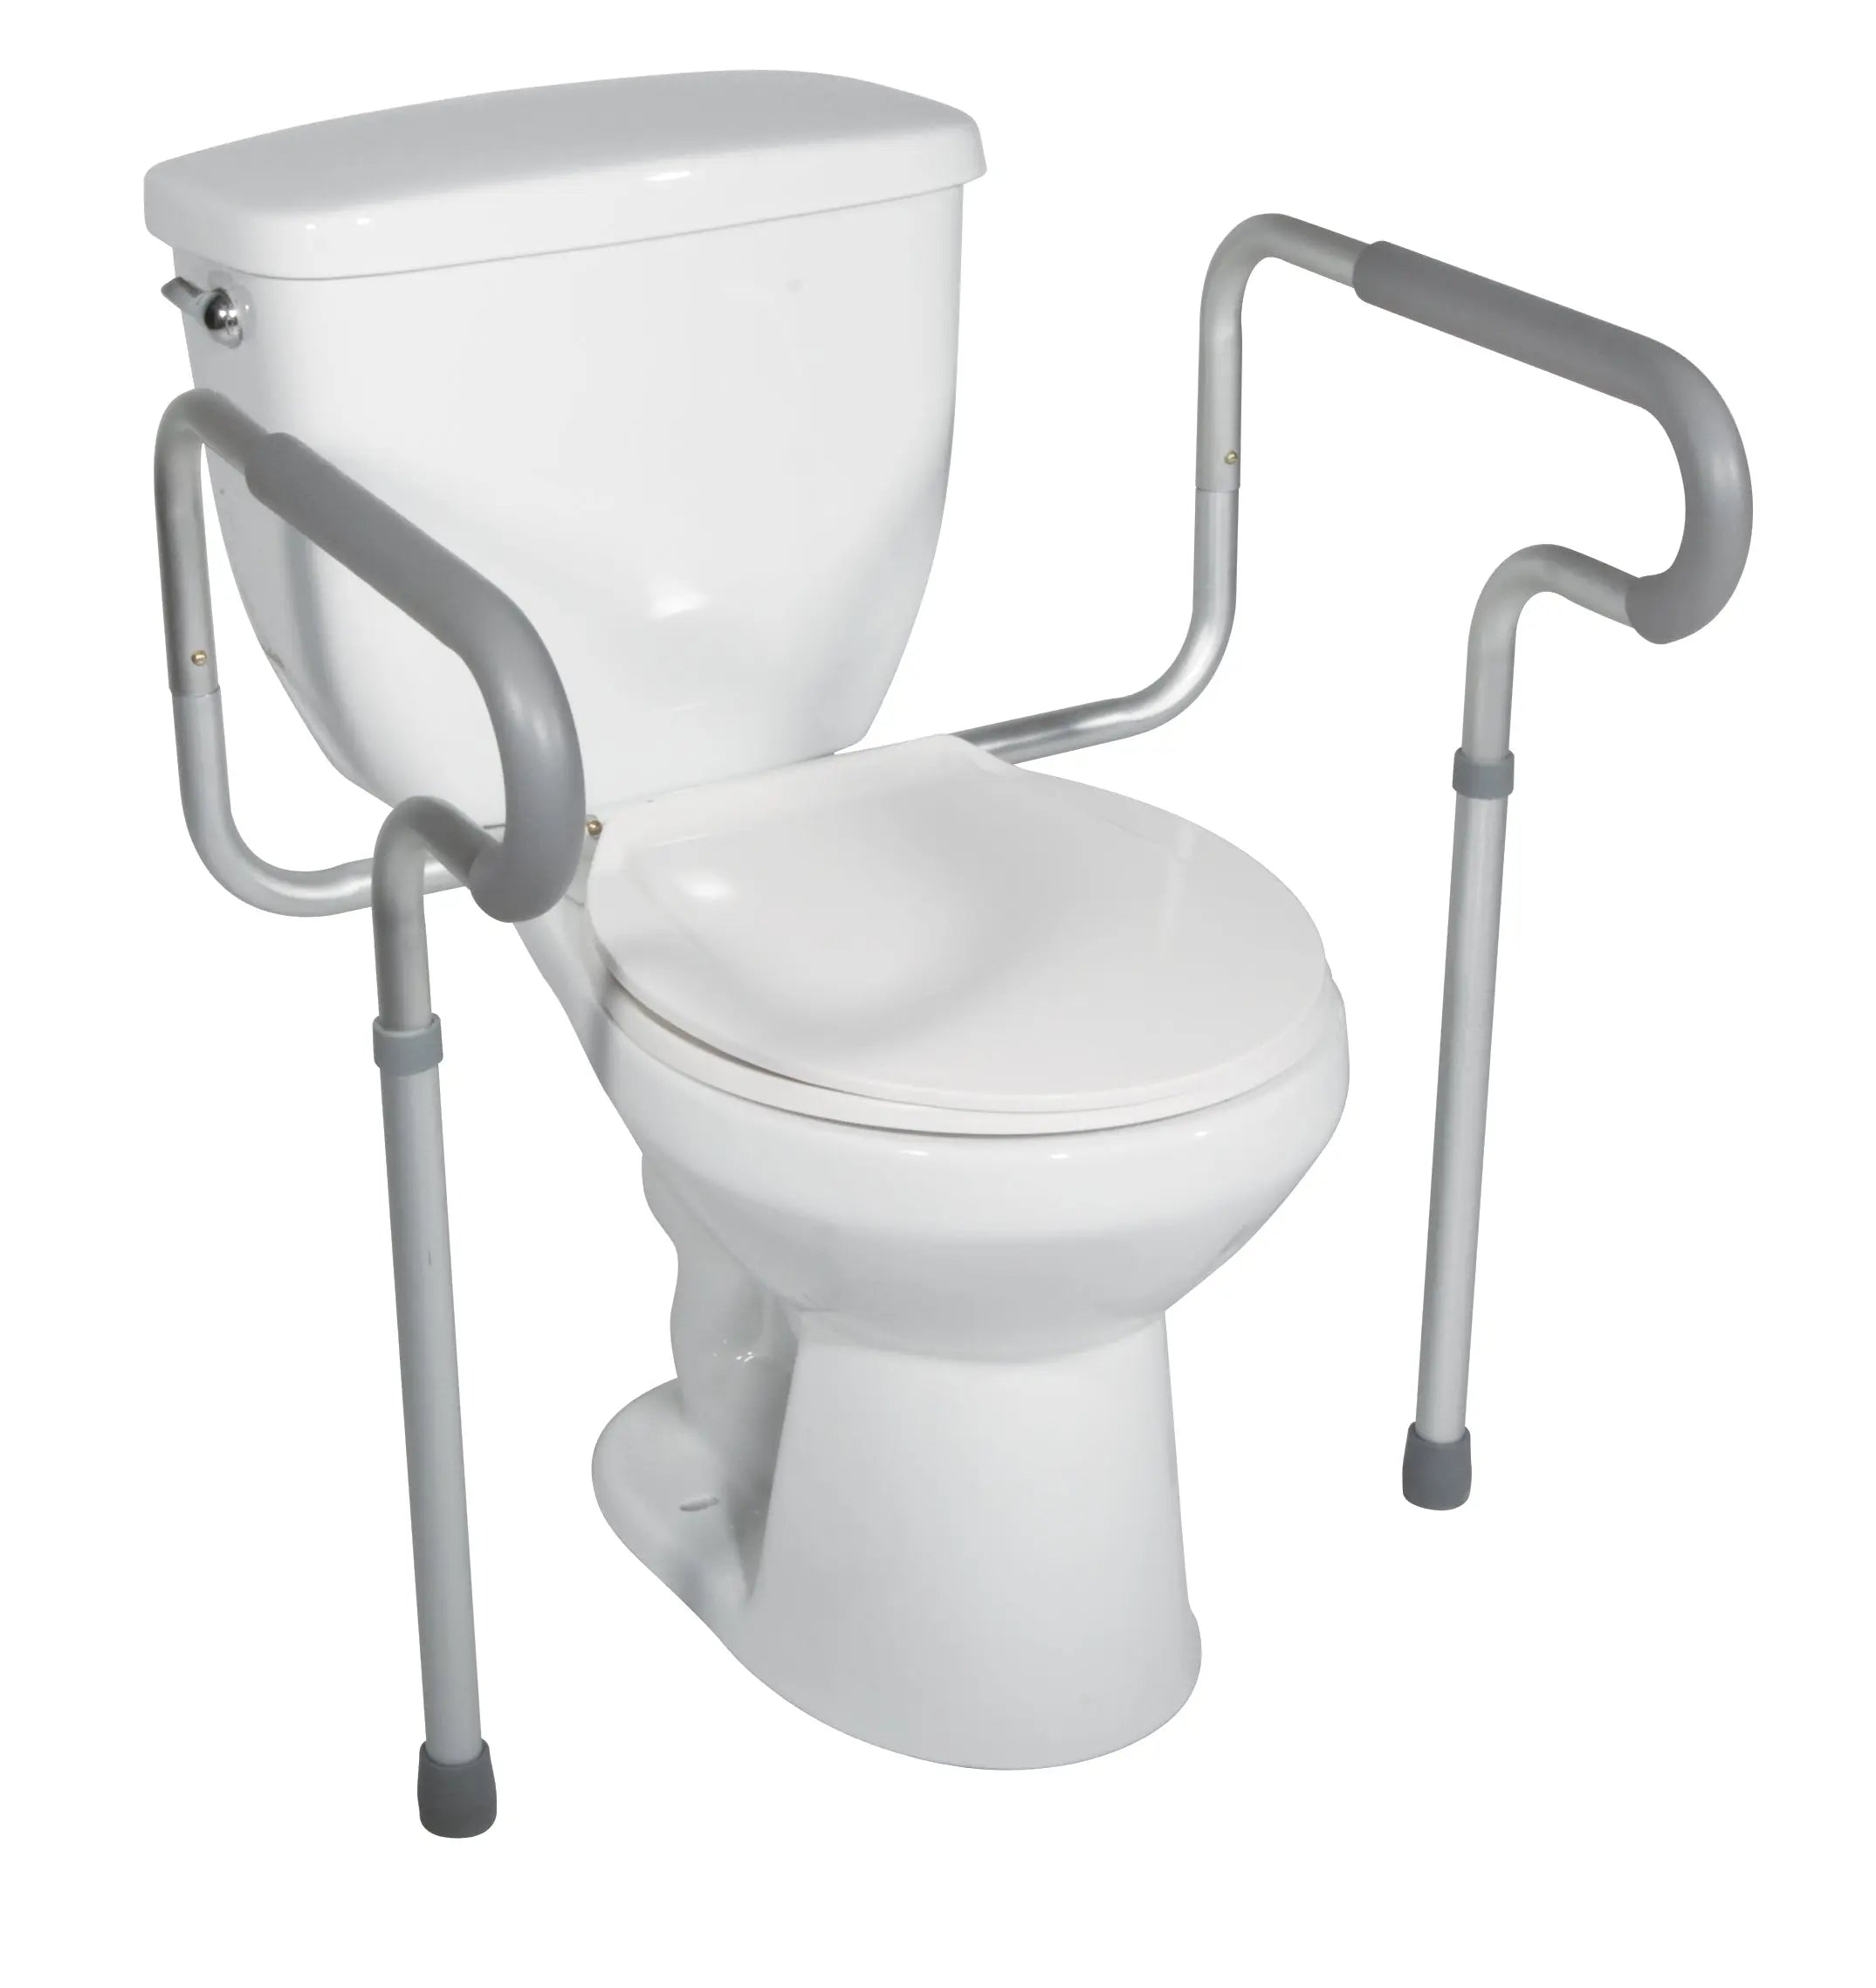 Toilet Safety Frame with Padded Armrests - Home Health Store Inc